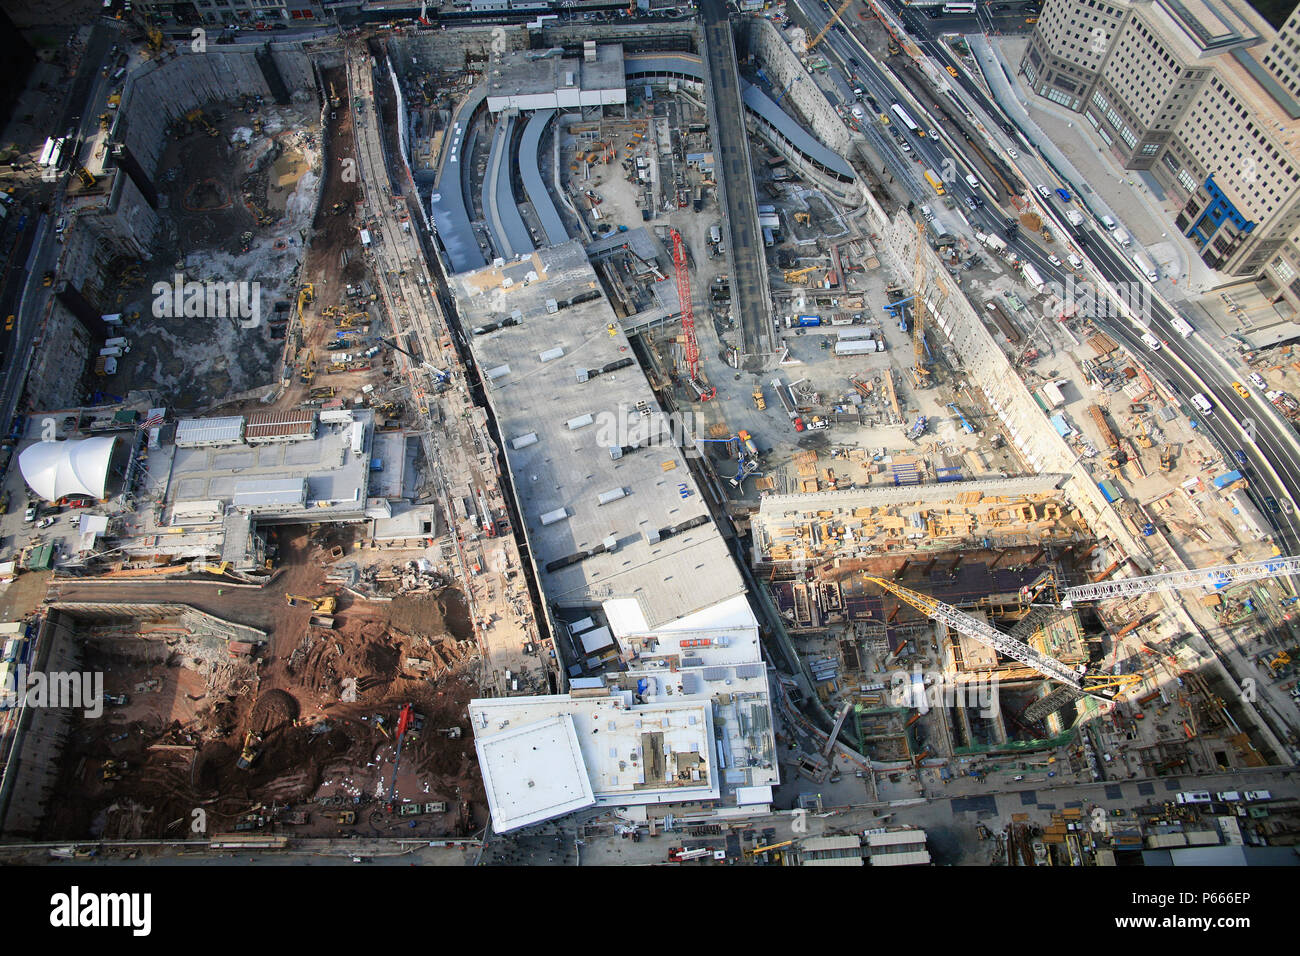 Overview of World Trade Center site as seen from 7 WTC, Lower Manhattan, New York City, USA Stock Photo